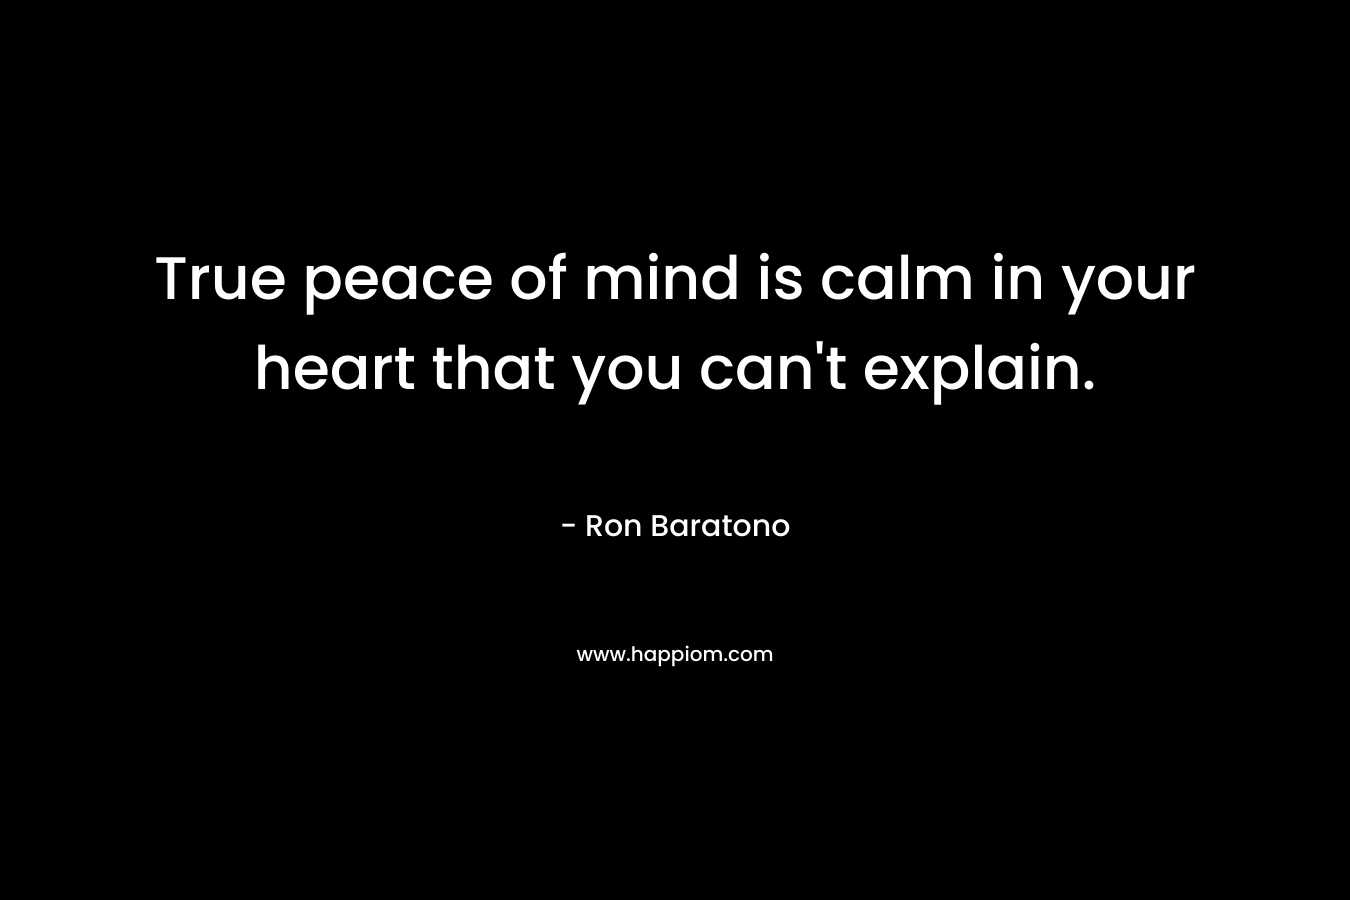 True peace of mind is calm in your heart that you can't explain.